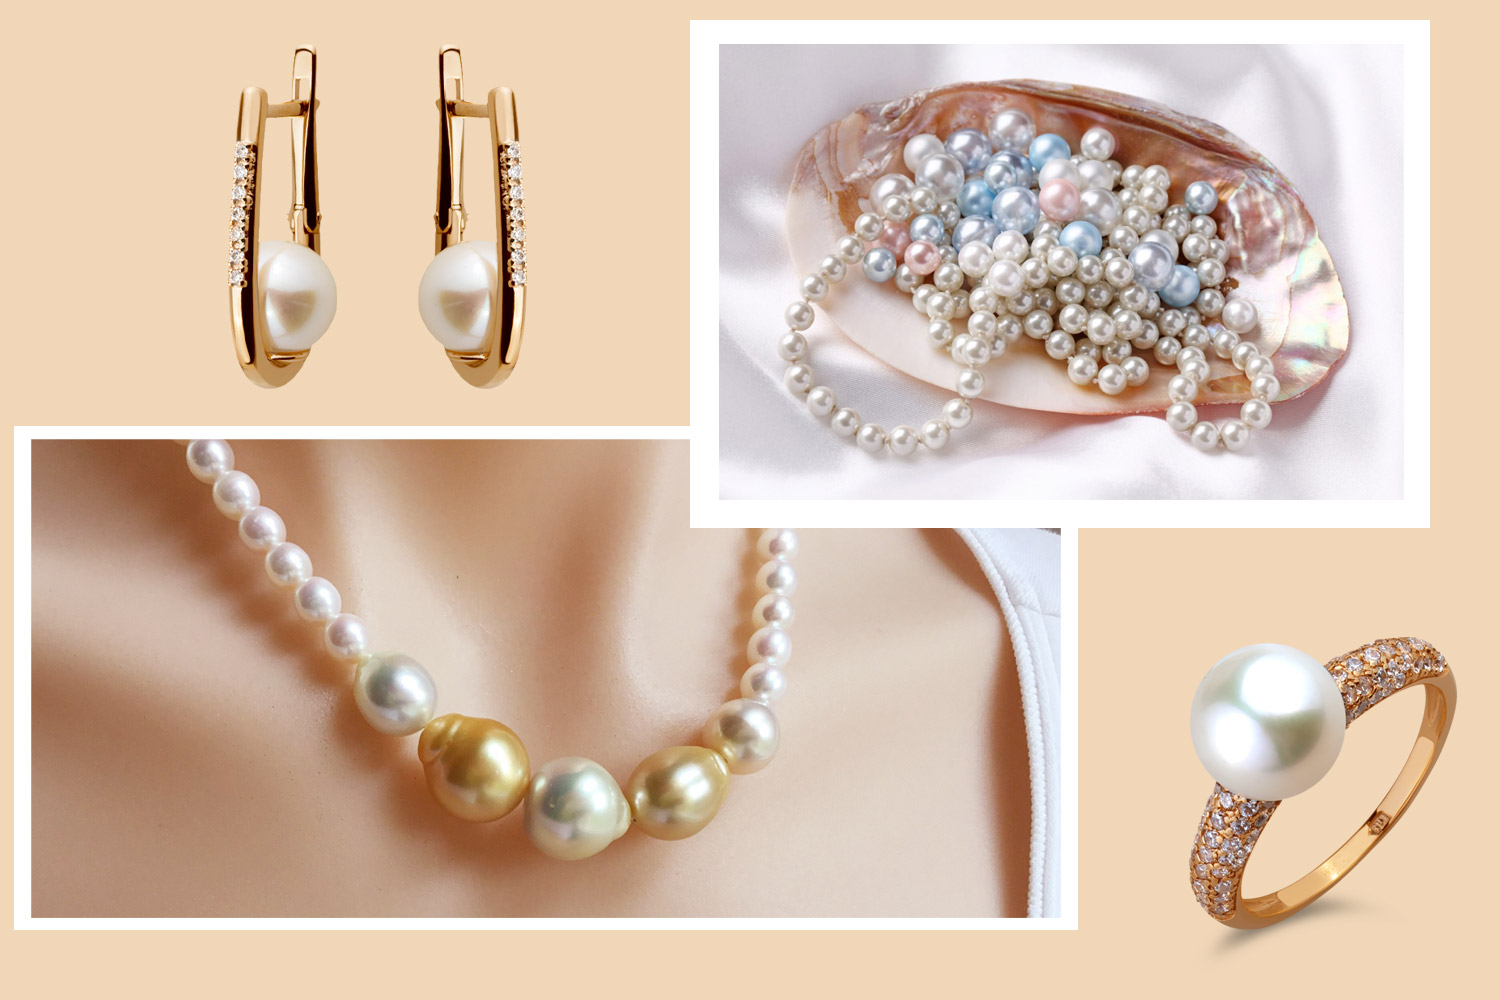 The magical and healing properties of pearls